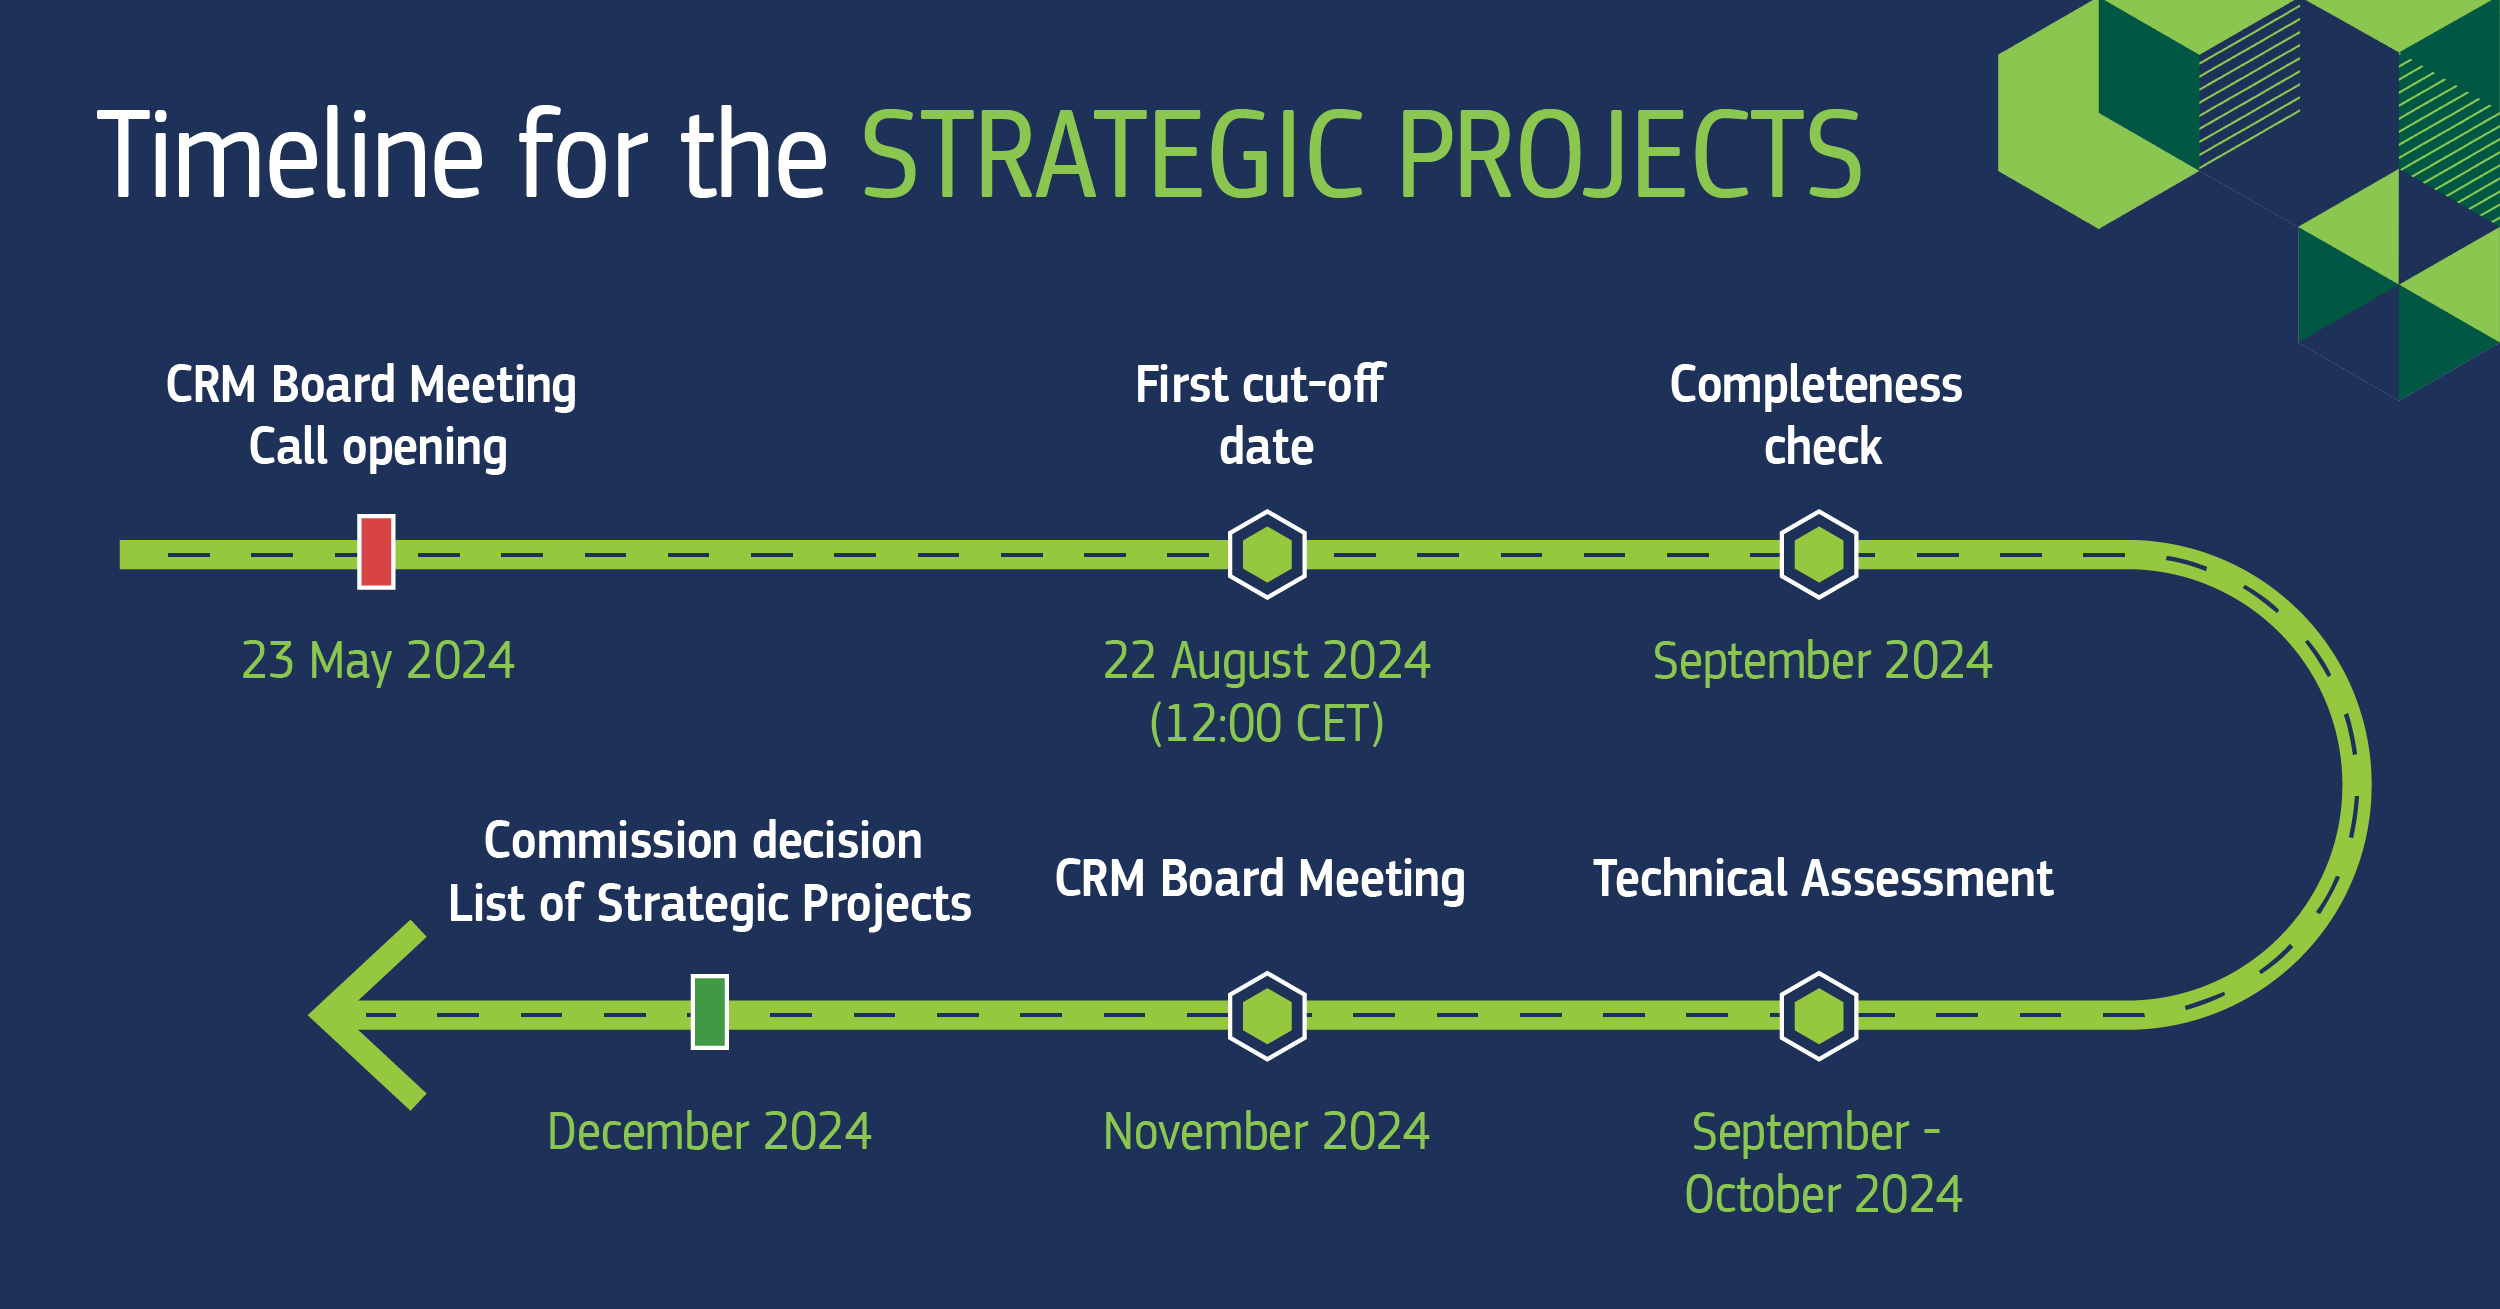 Infographic with a timeline for the strategic projects under the Critical Raw Materials Act